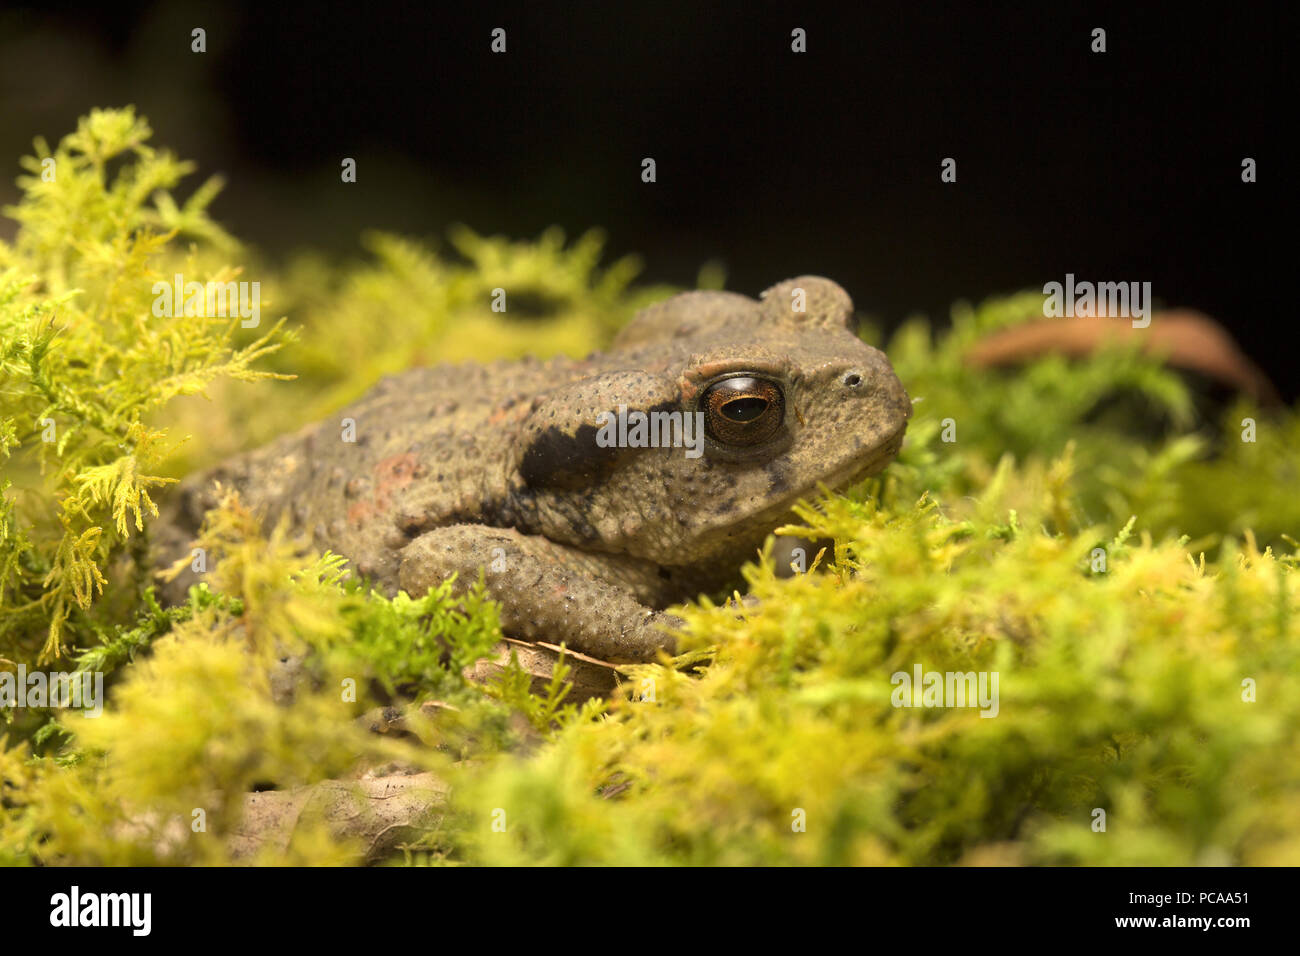 Bufo bankorensis, Central Formosa toad, Bankor toad Stock Photo